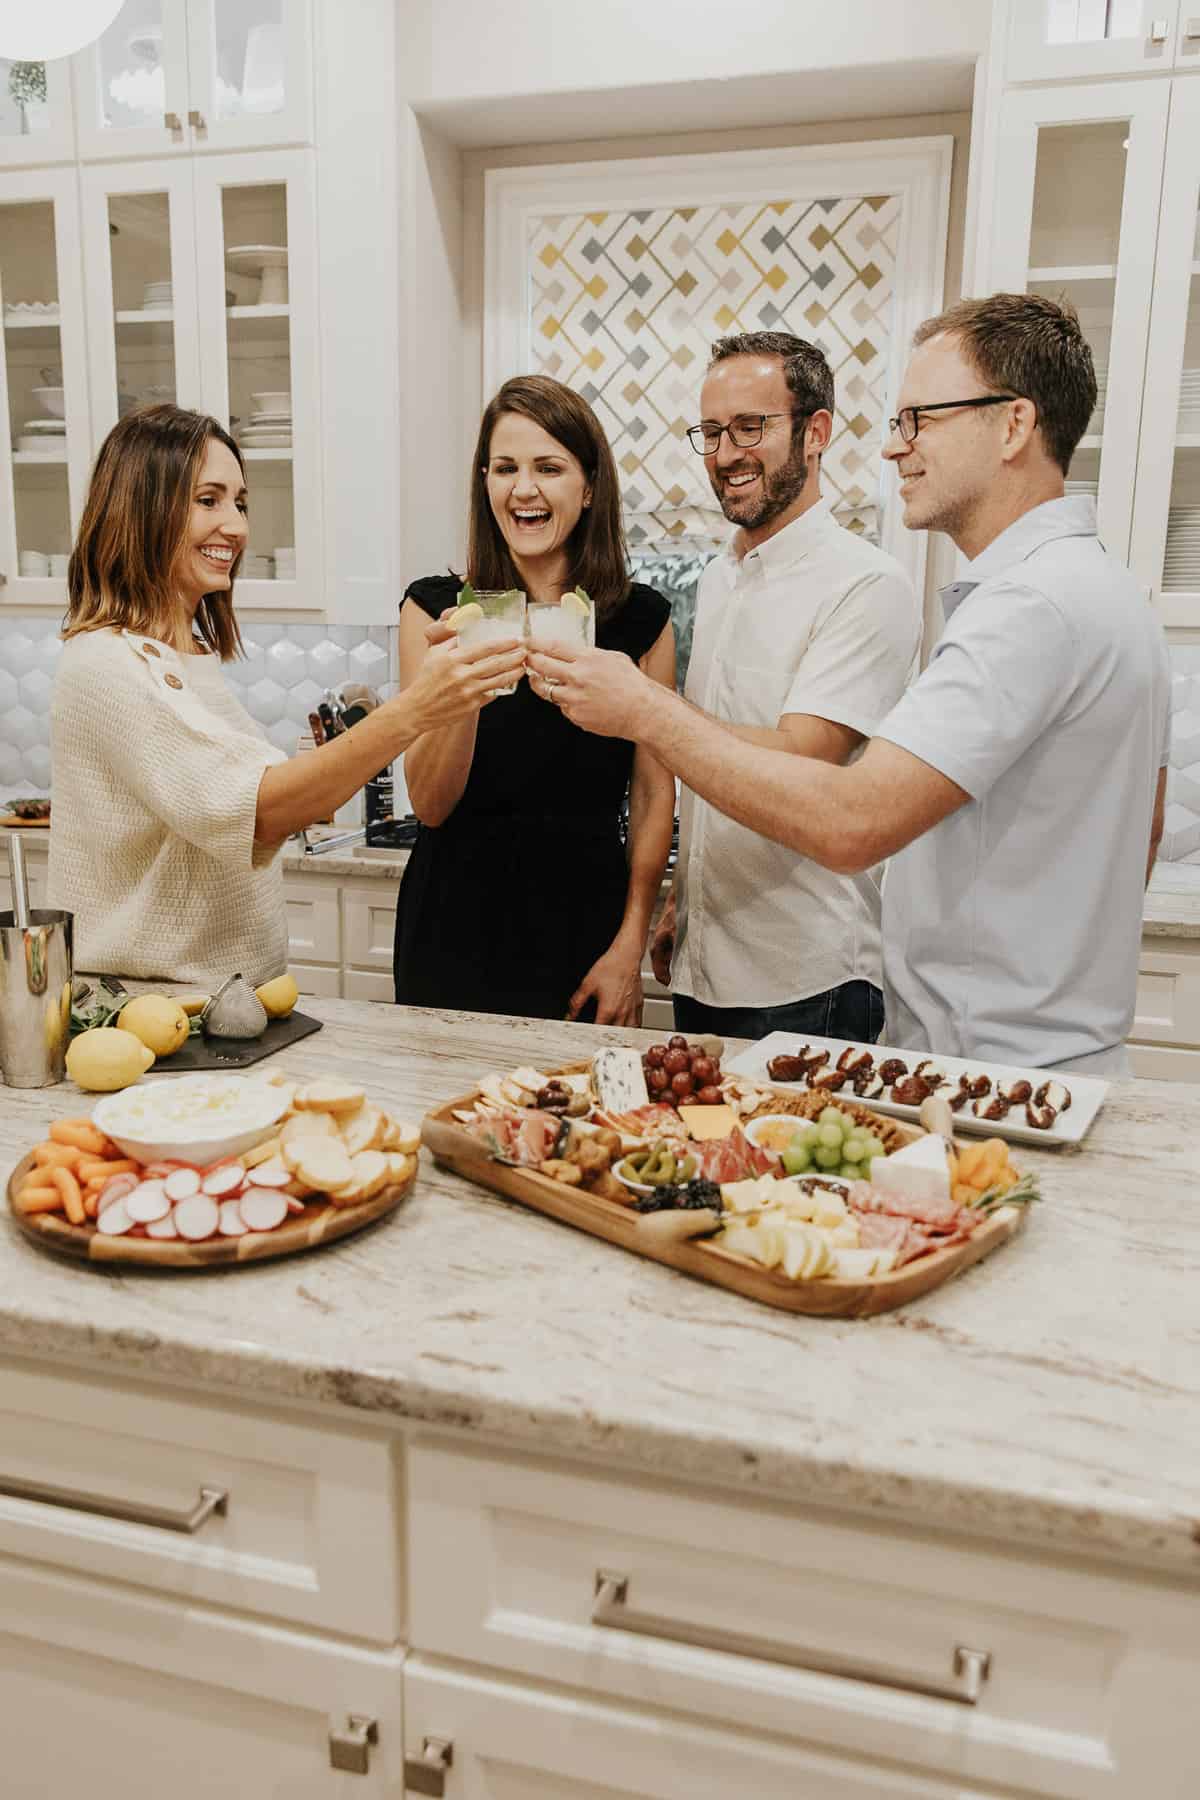 Tips for Hosting a Stress-Free Dinner Party